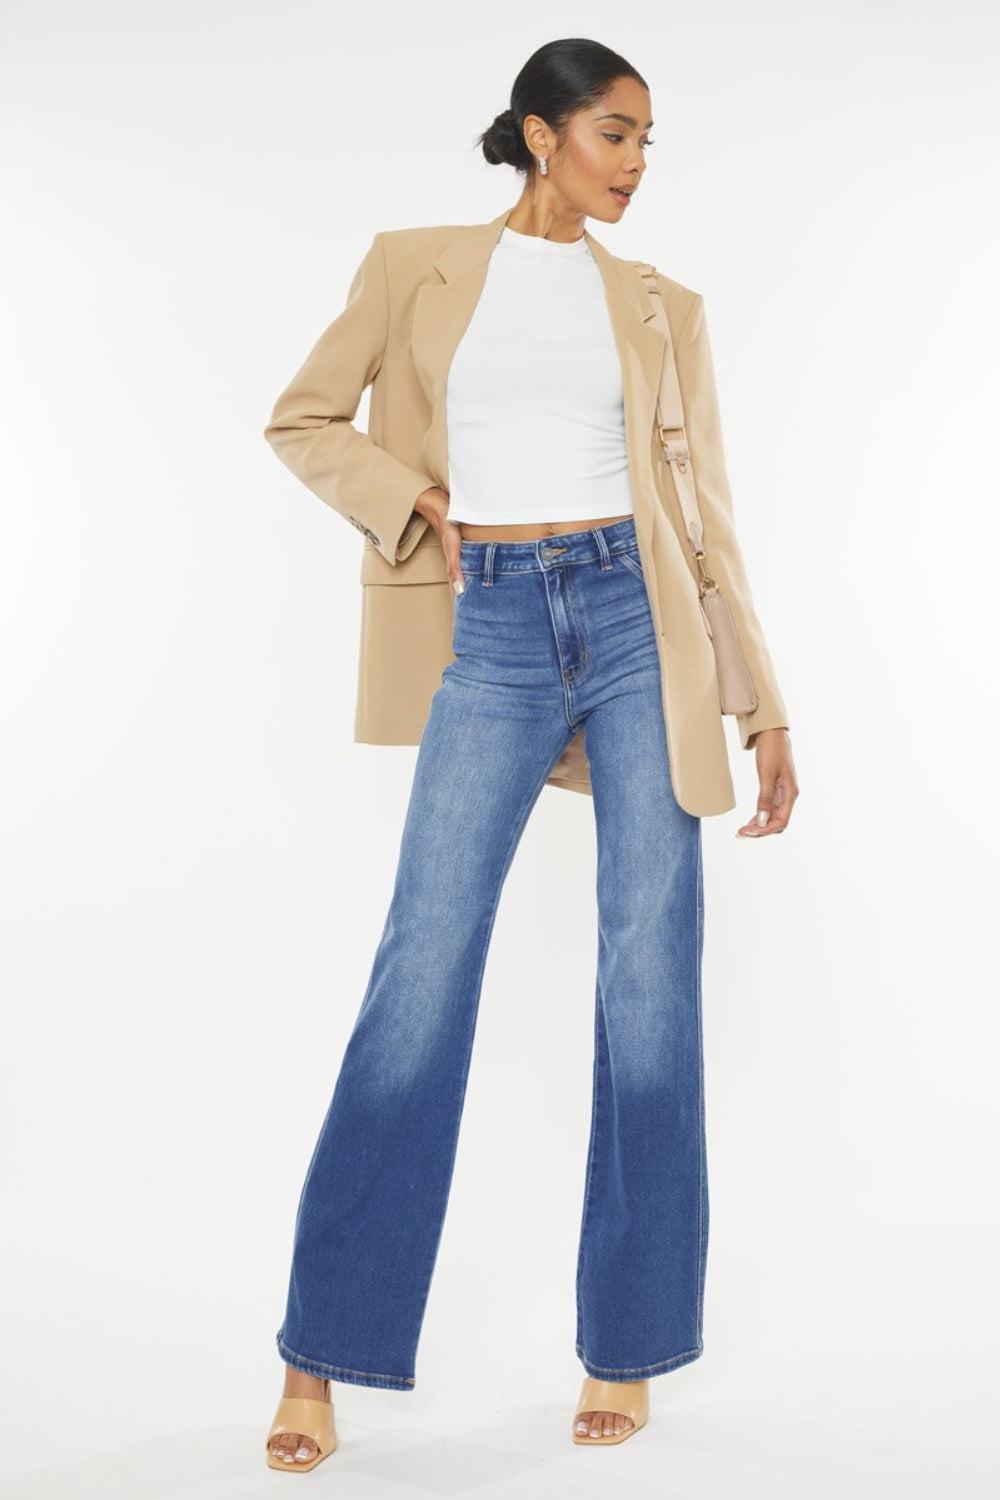 a woman wearing a tan blazer and jeans